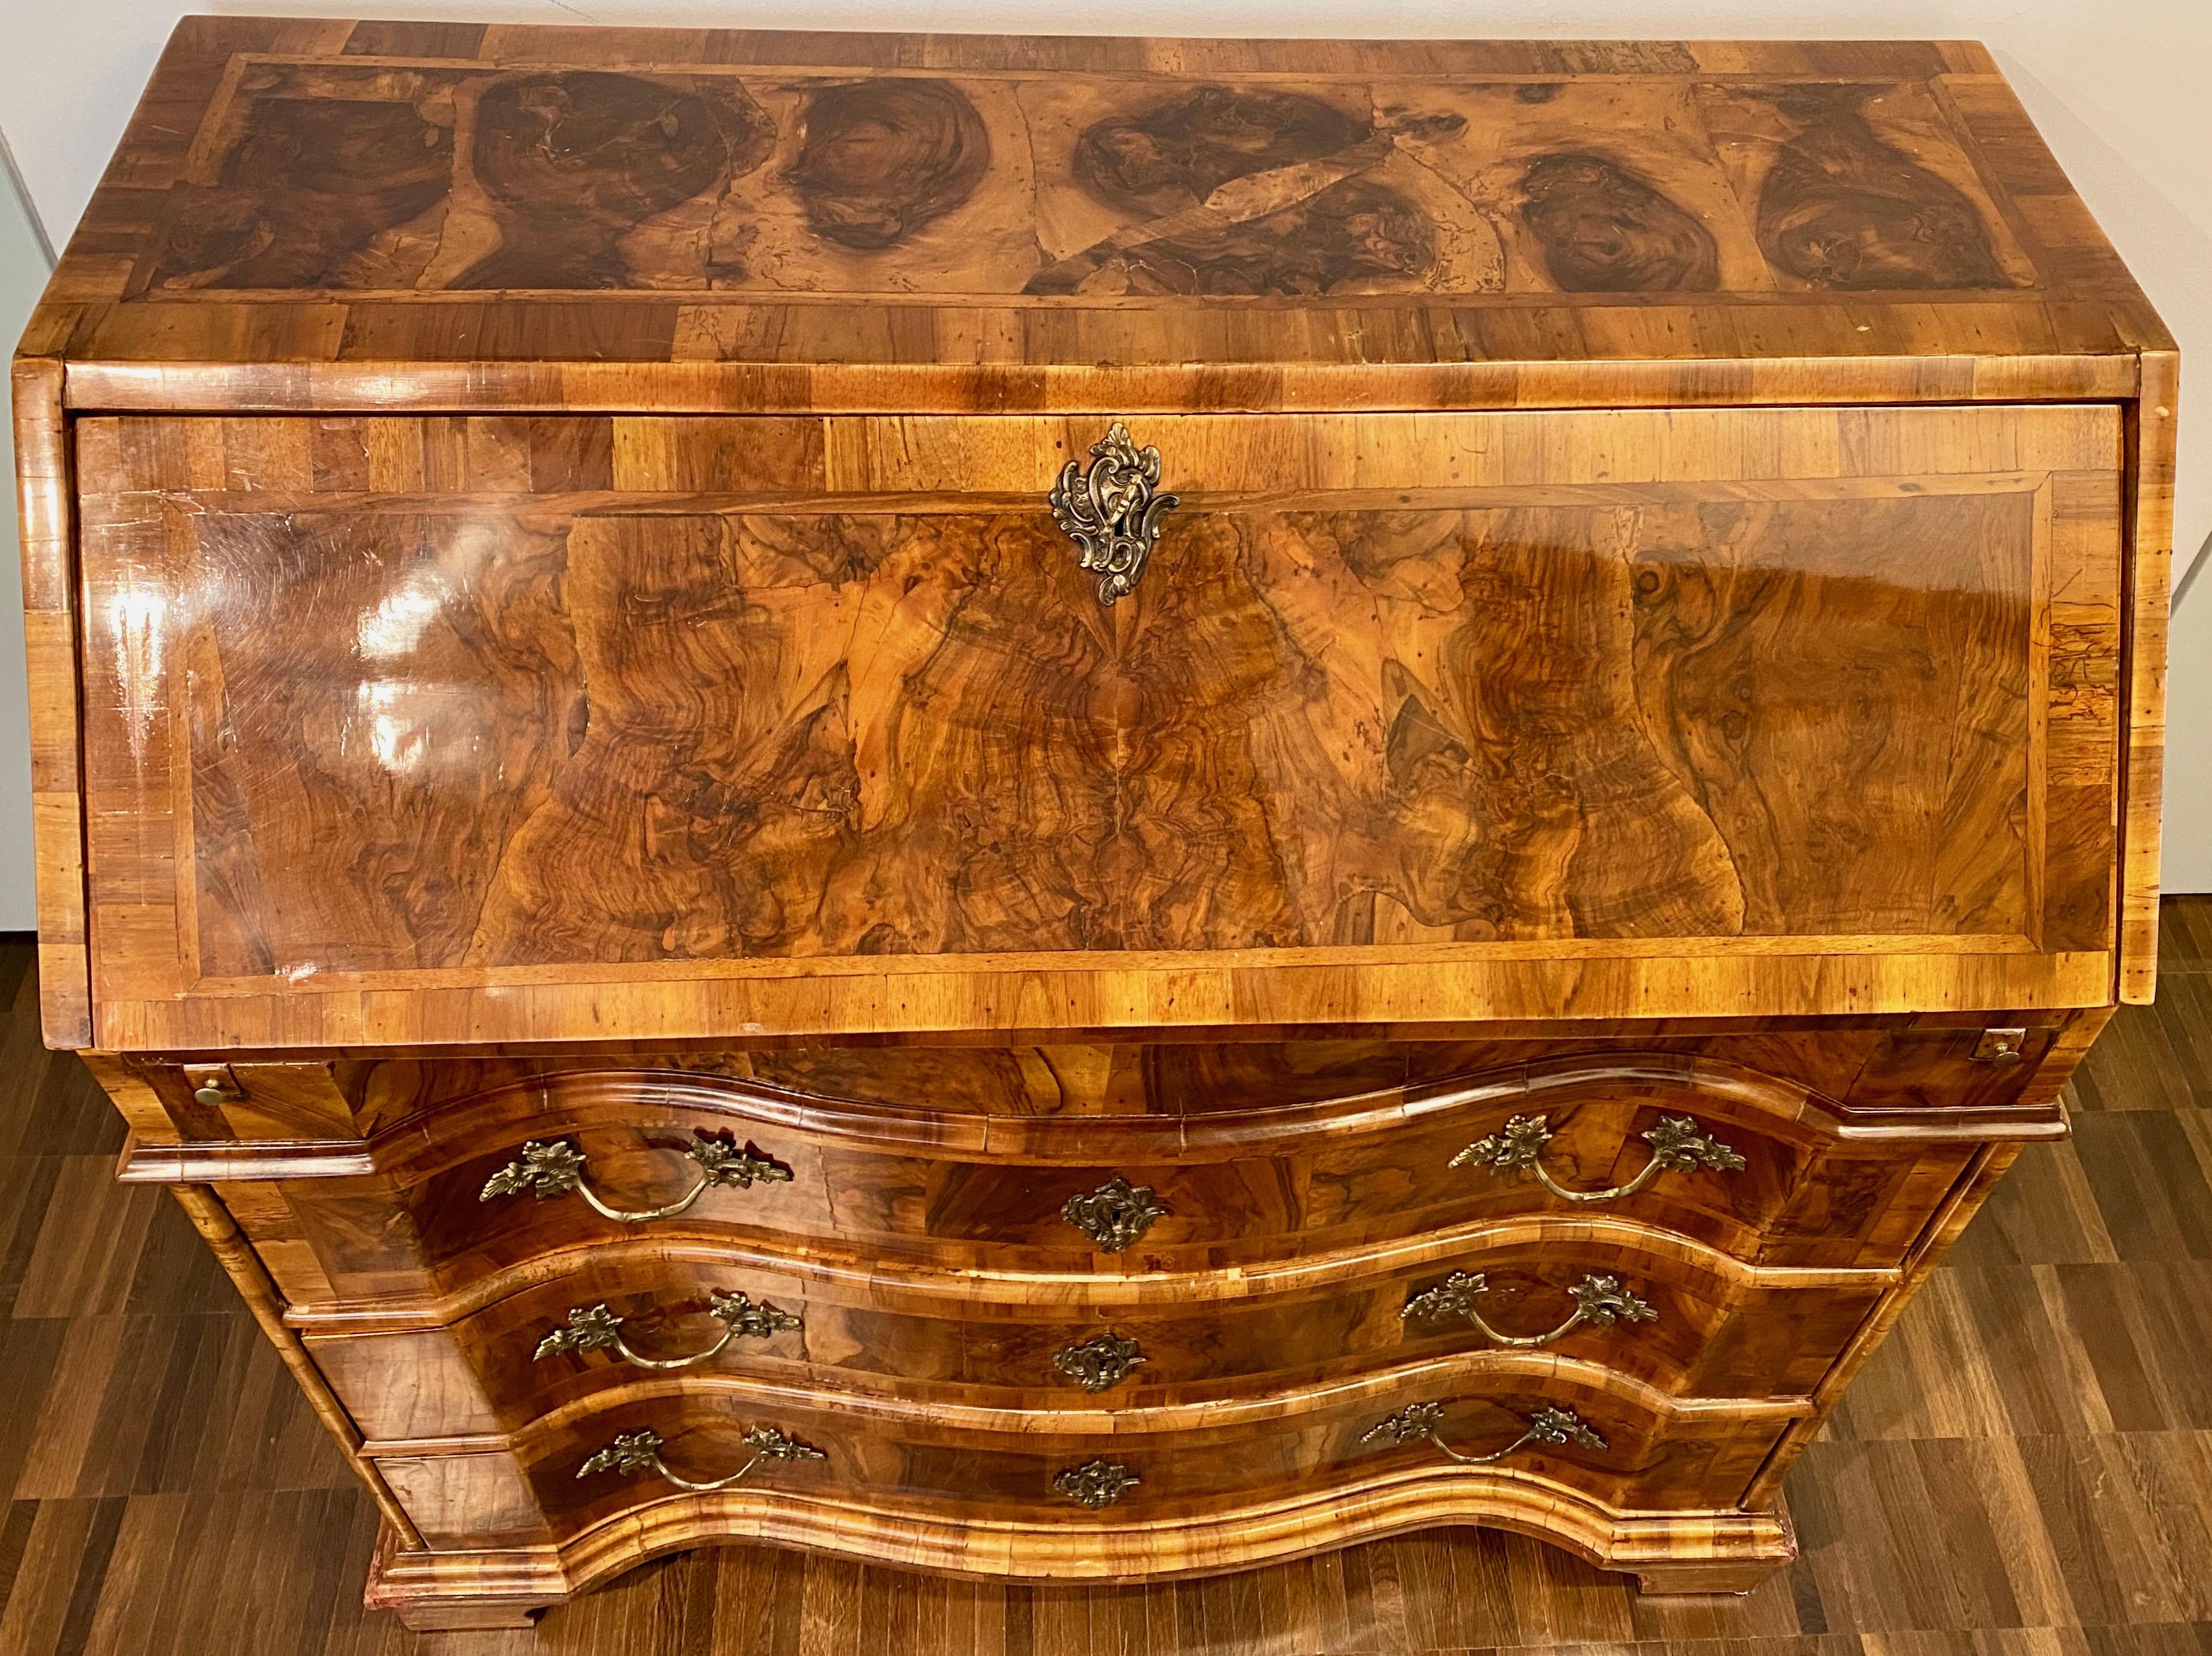 Italian burl walnut Venetian Rococo slant front desk, 18th century.

A Louis XV period walnut and burl walnut veneered Bureau. The inside of the slant front desk is fitted with one drawer on each side of a central door and a secret compartment on